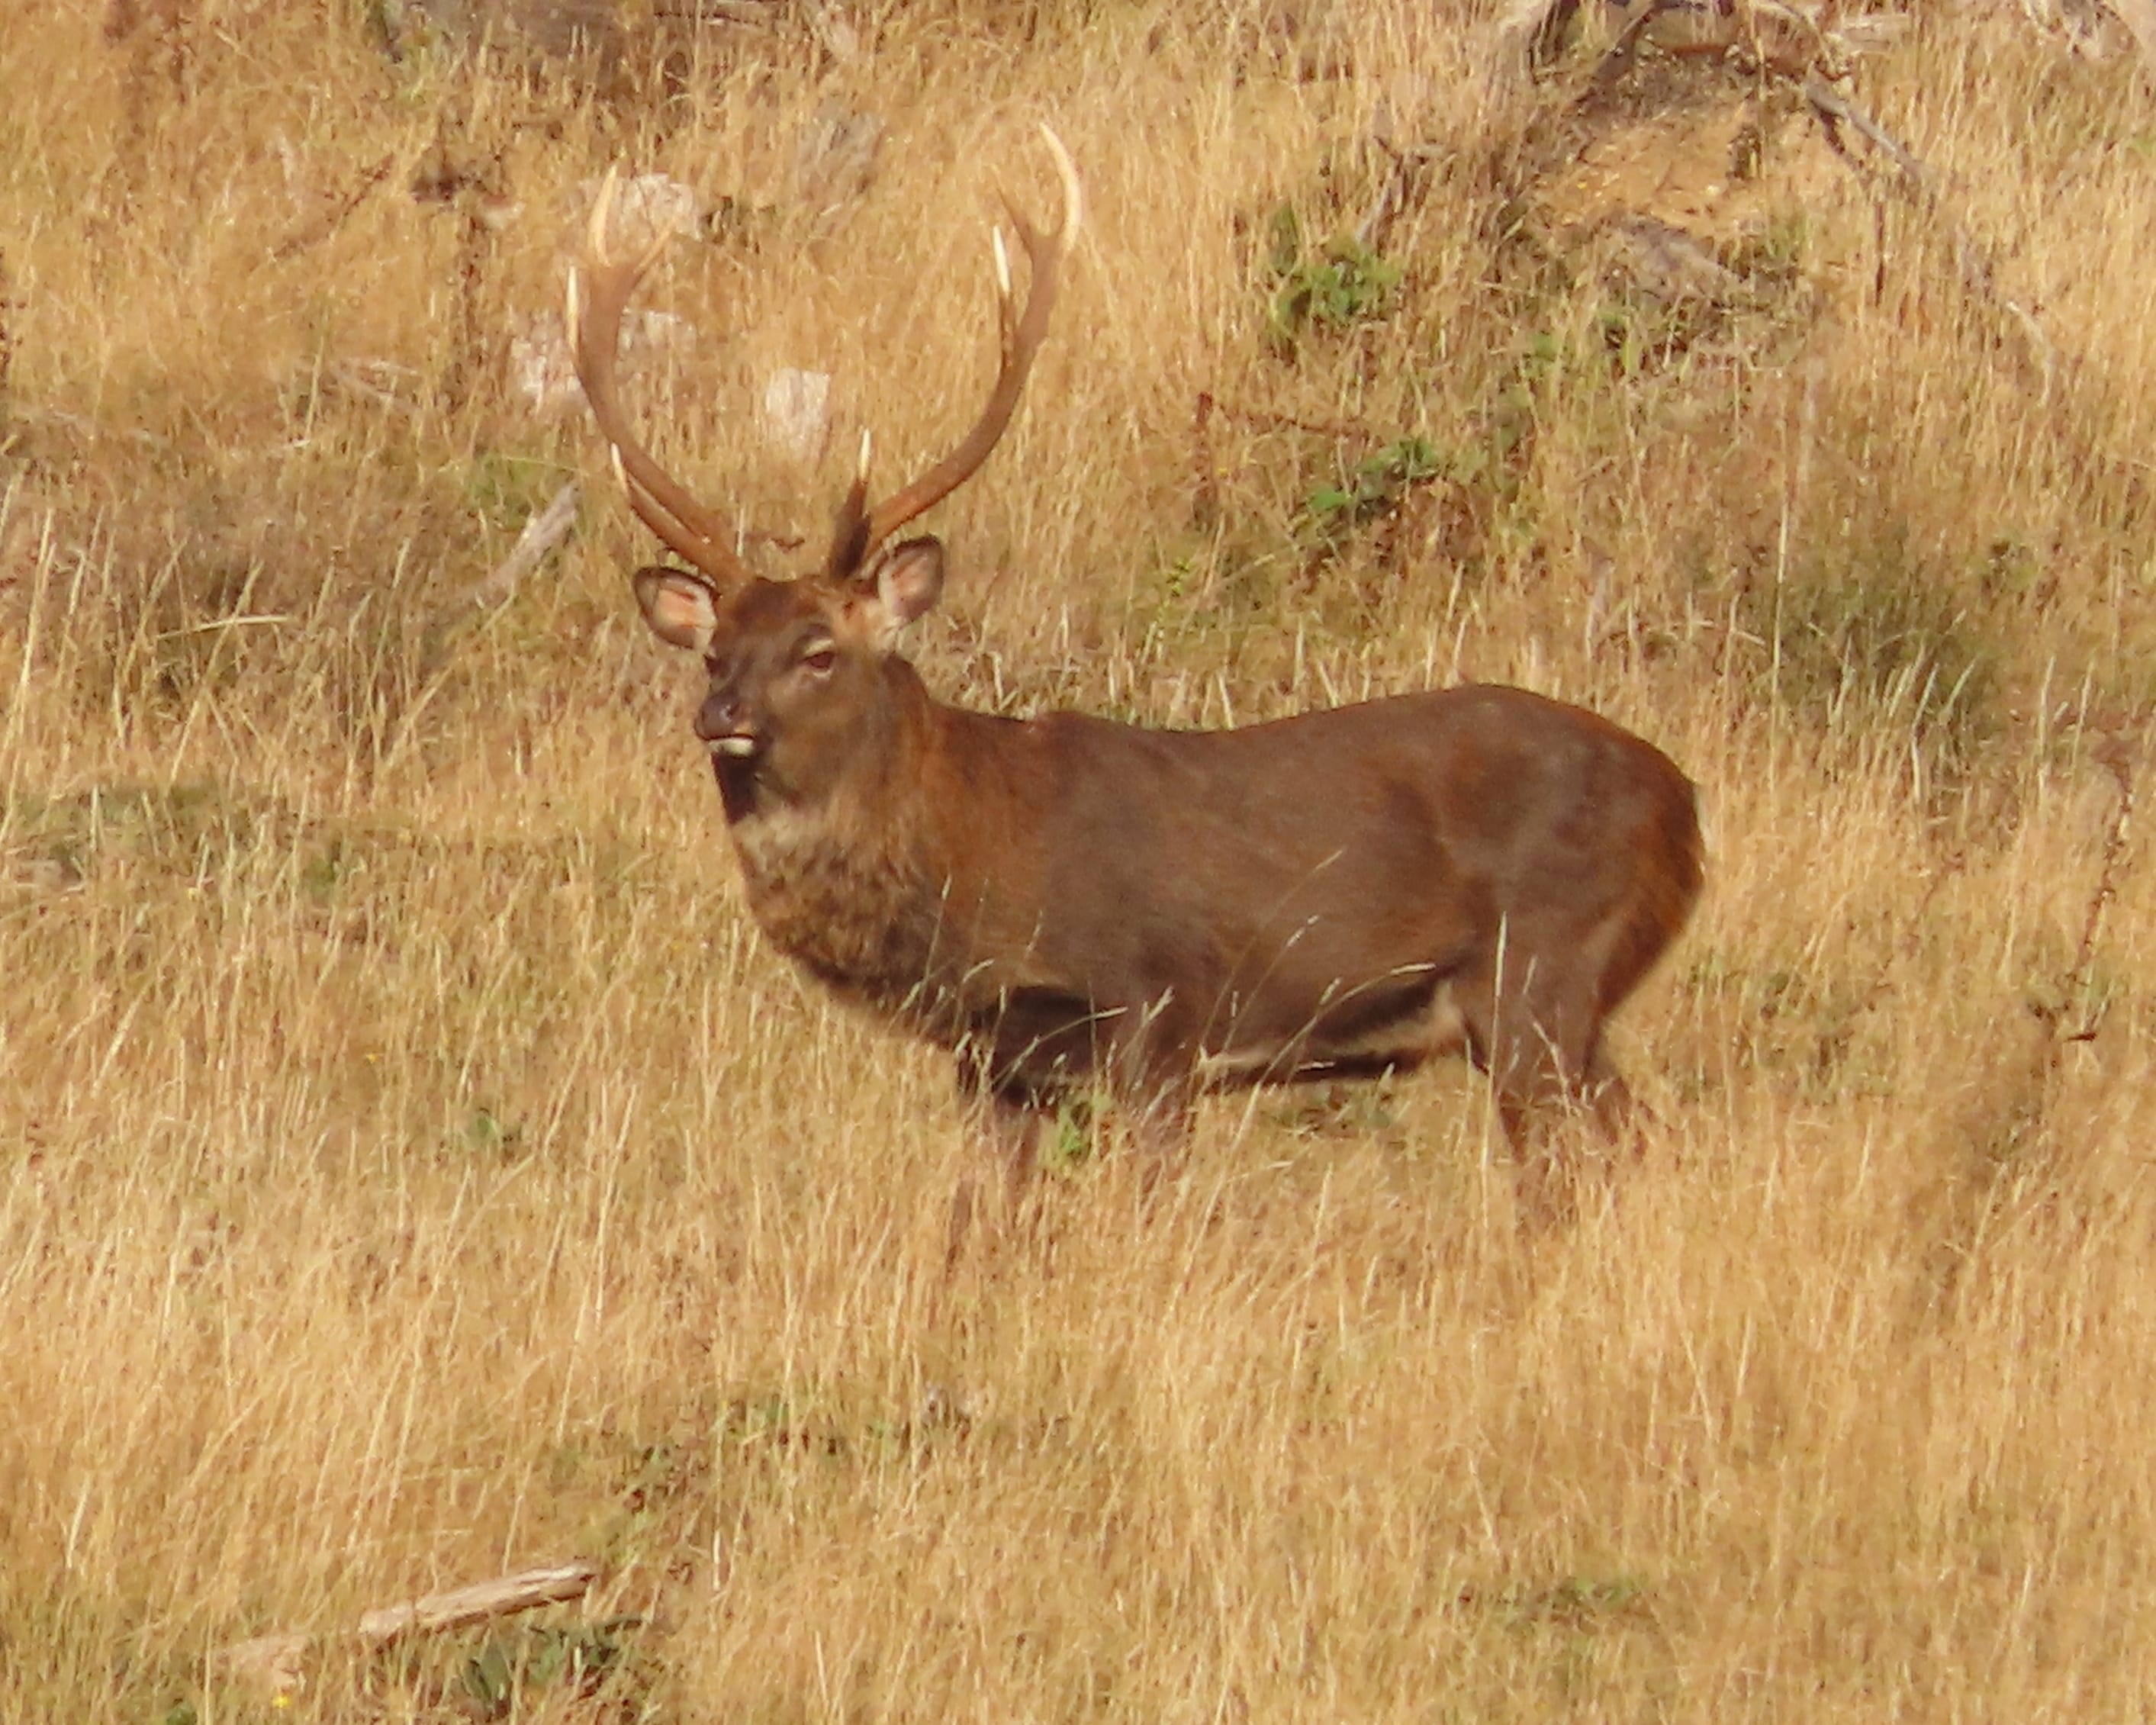 Image of a simple Deer Stag in the grass. Poronui Hunting.